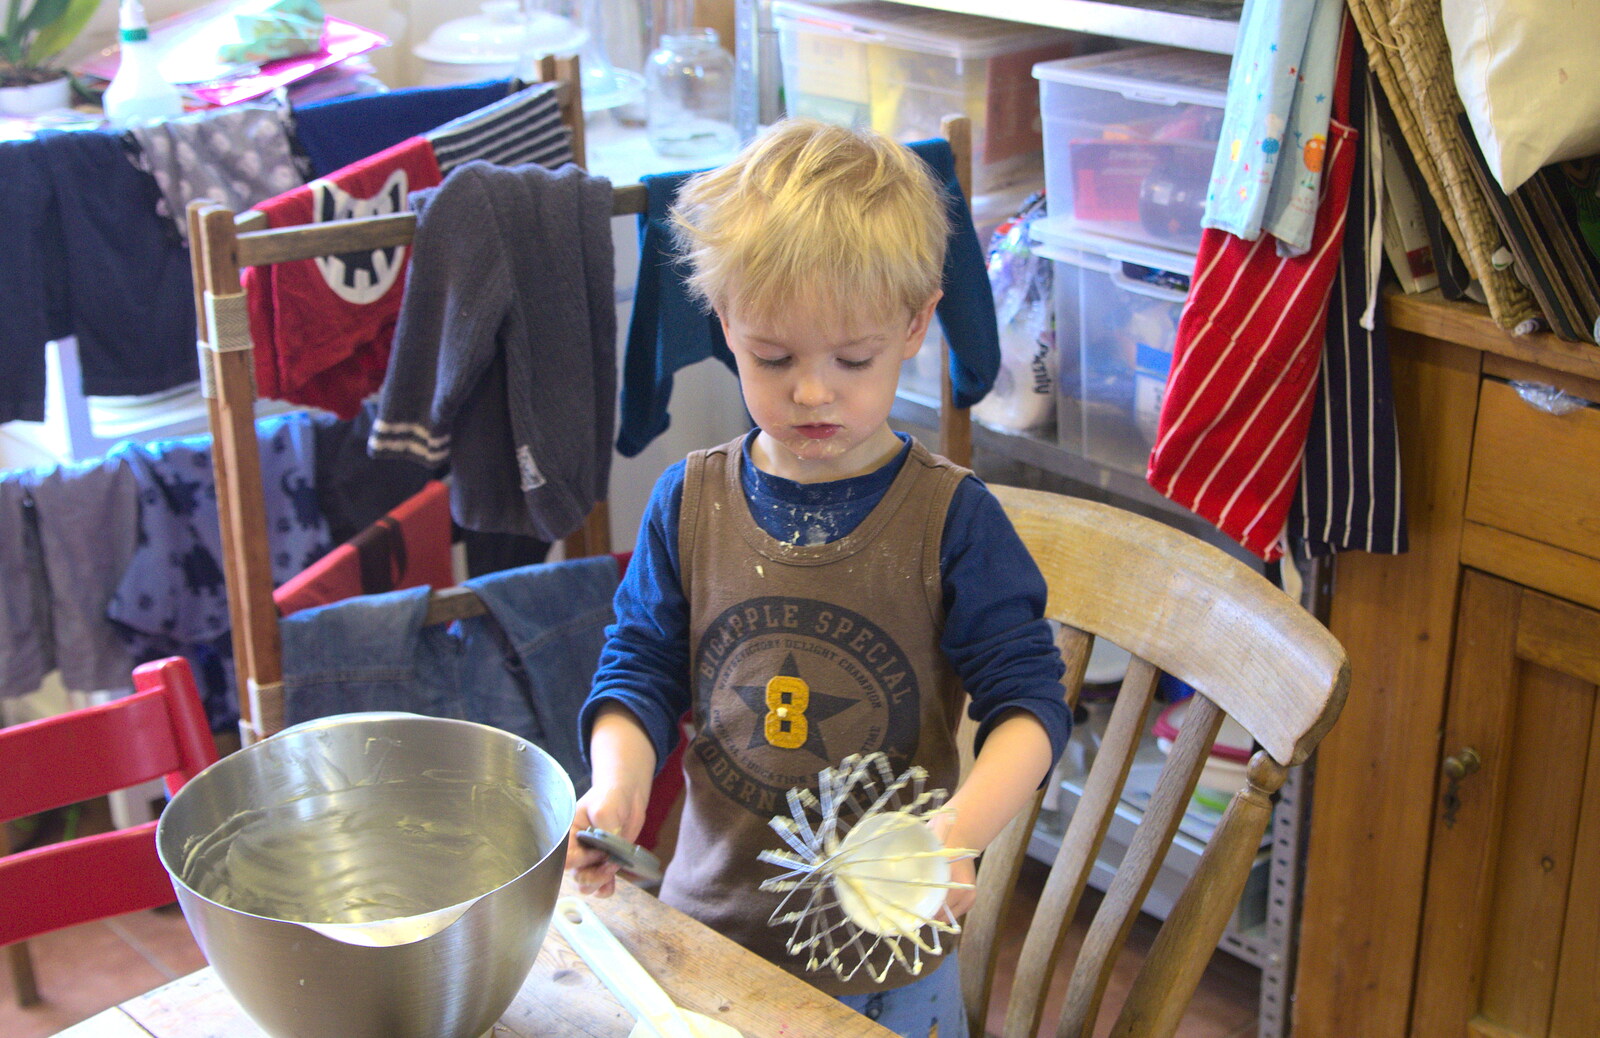 Harry 'helps' to make a cake from The Last Day of Pre-School and Beer at the Trowel and Hammer, Cotton, Suffolk - 29th March 2015